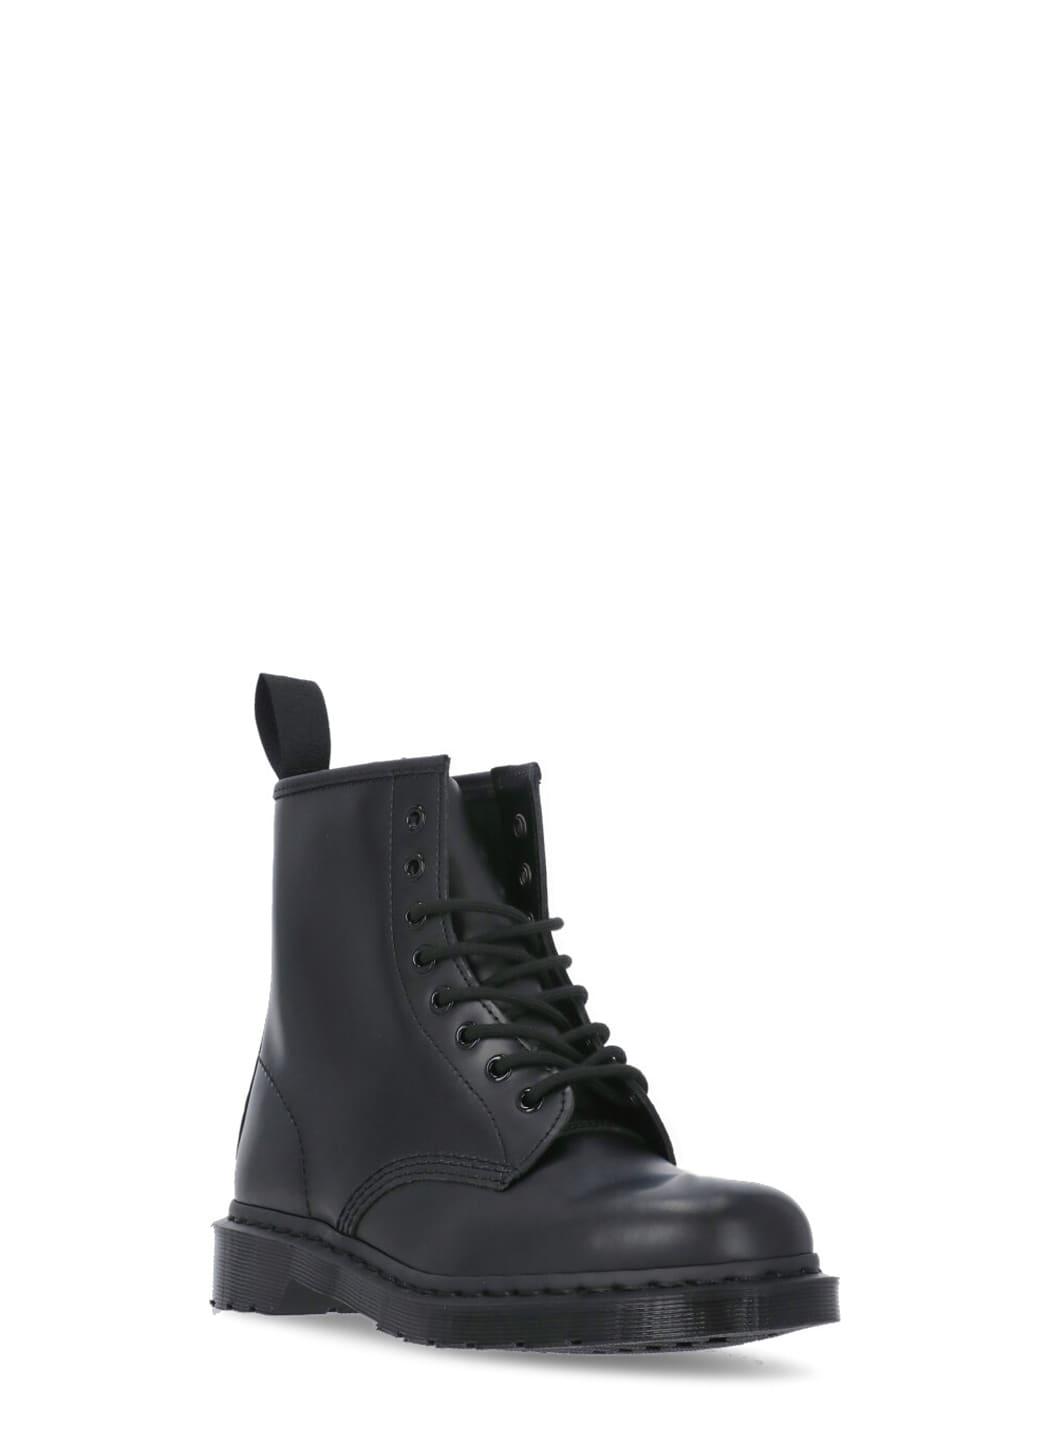 Dr. Martens Mono Boots in Black | Lyst